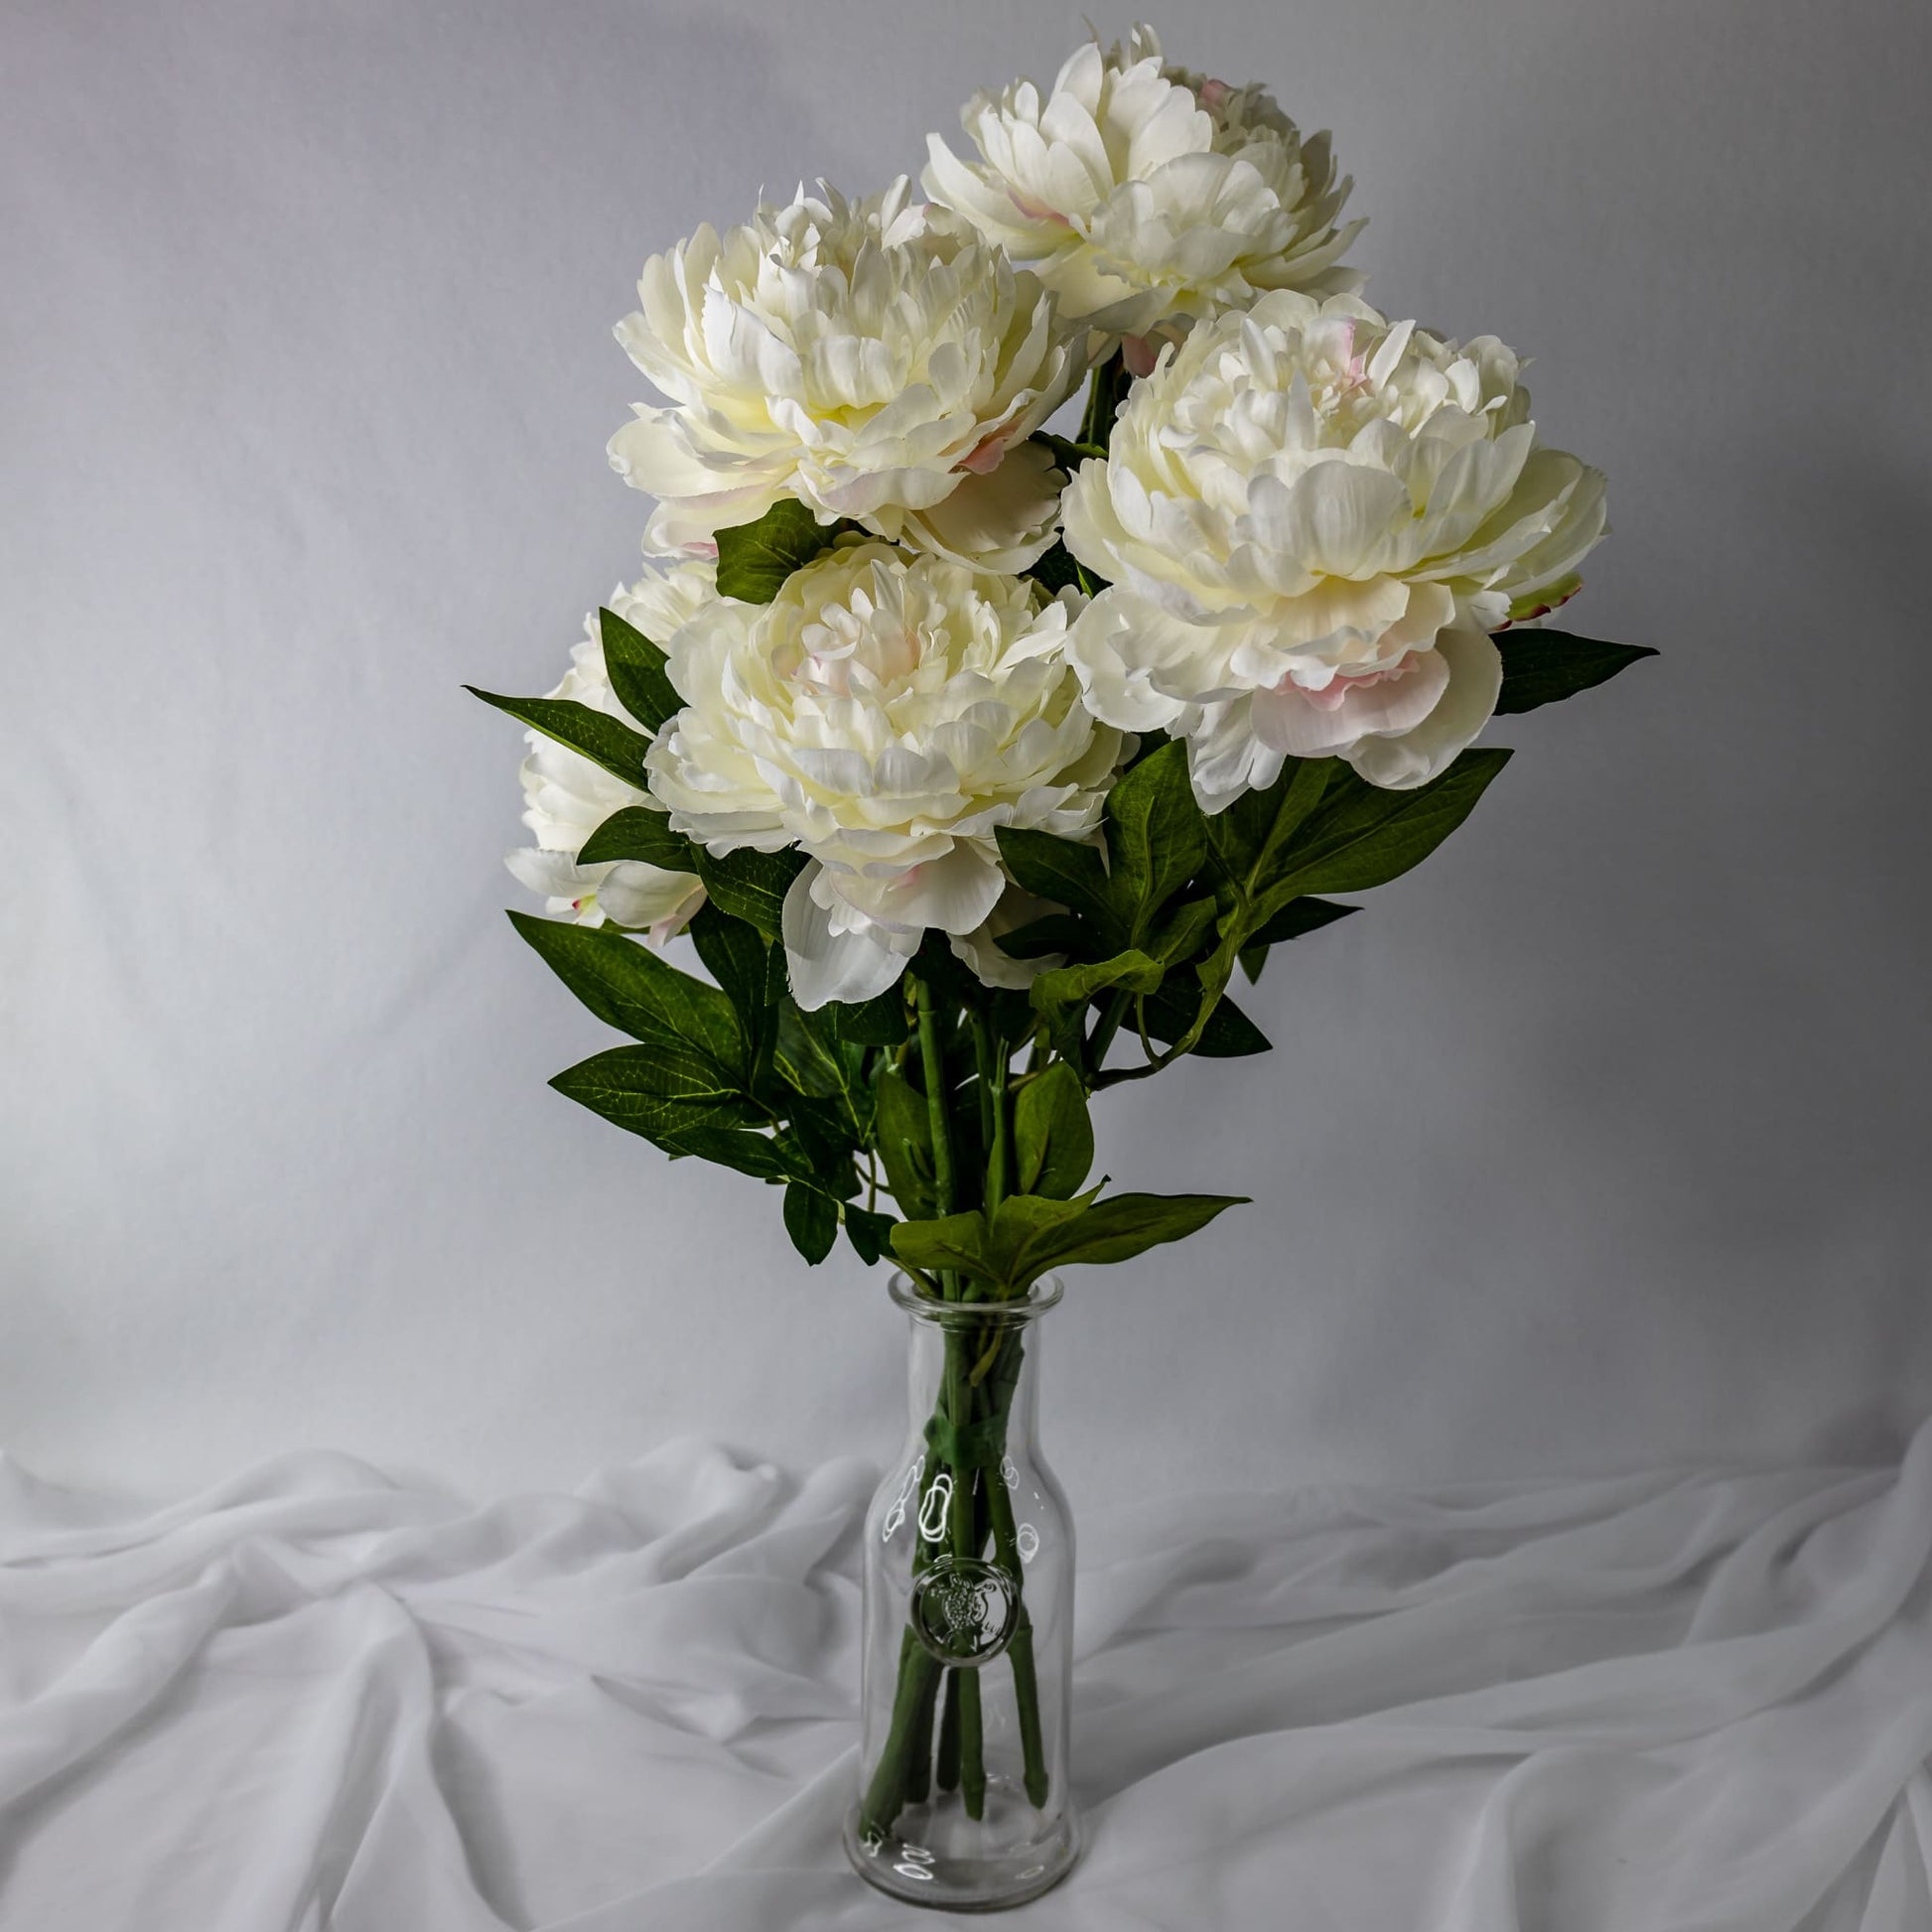 artificial large white peonies placed in transparent glass vase